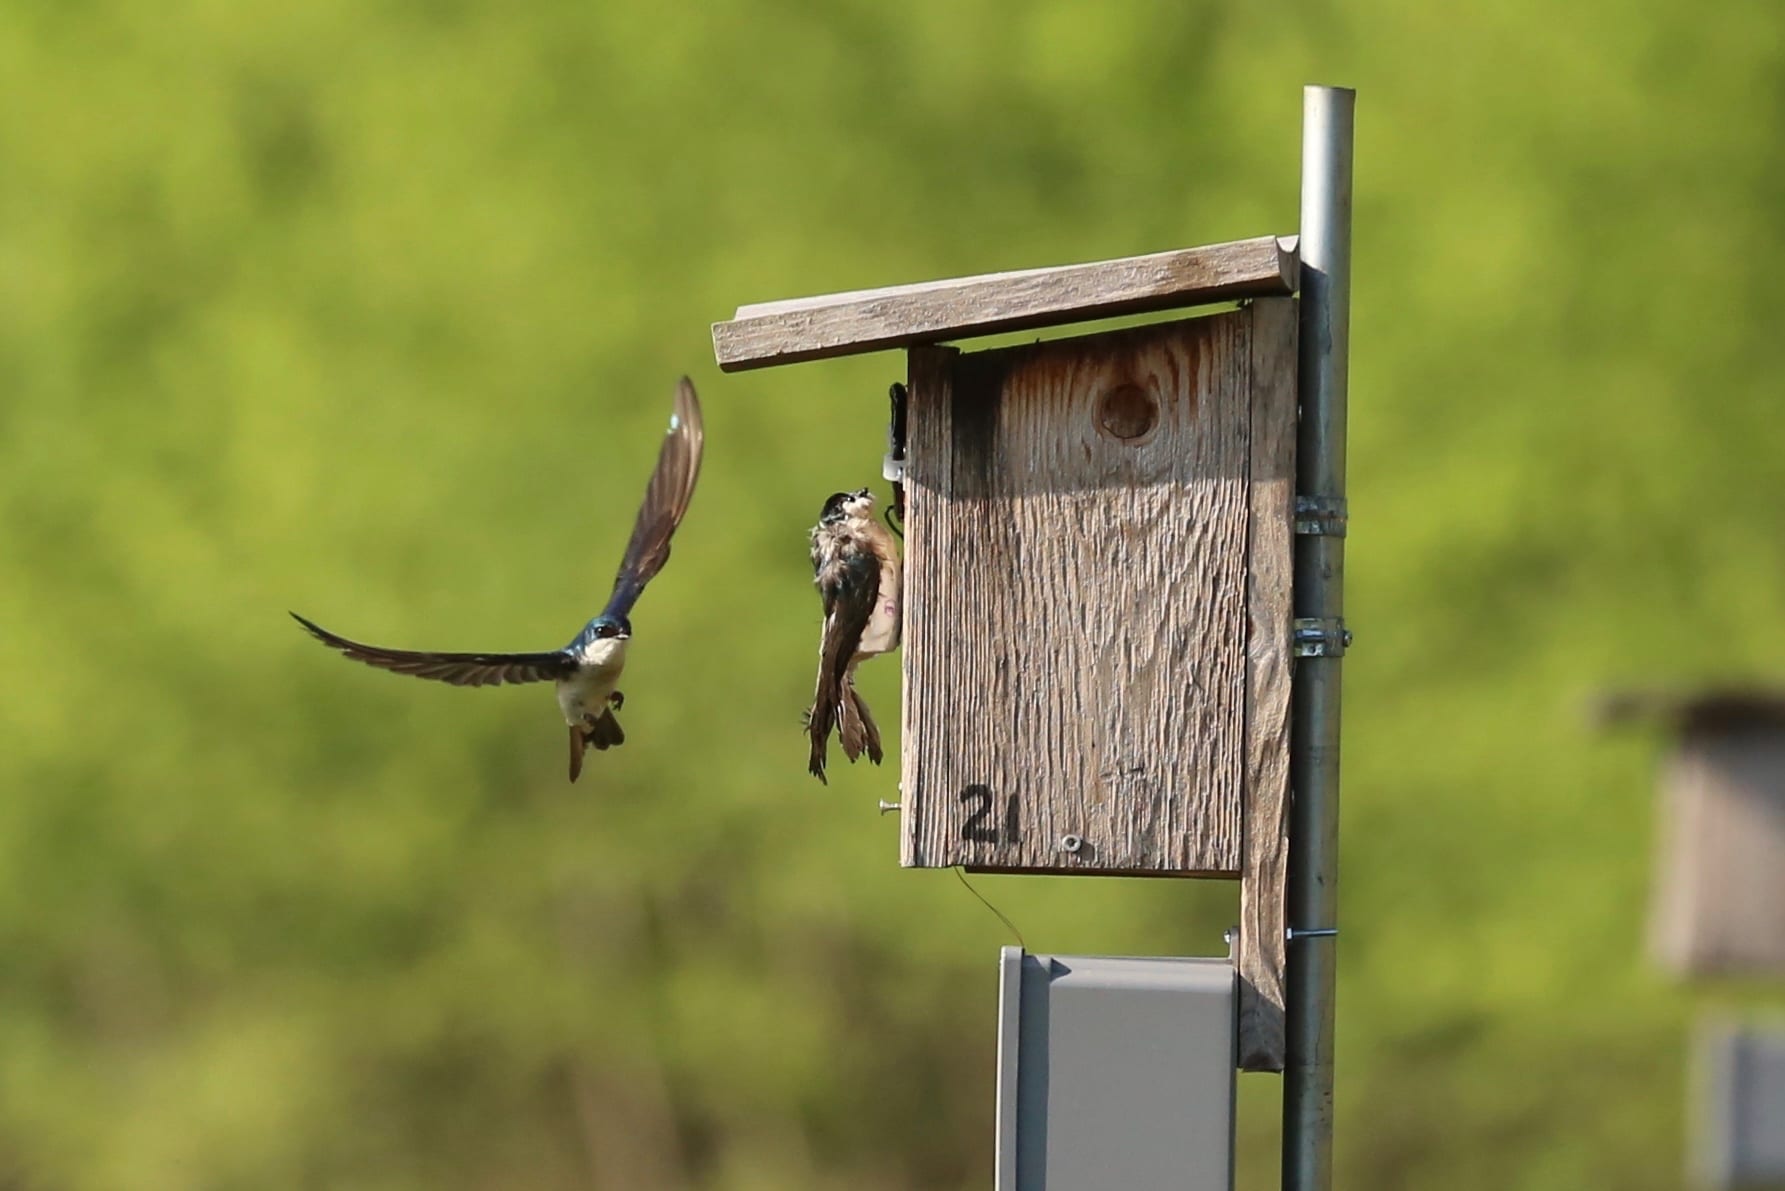 An adult bird flies toward a 3D-printed bird decoy of the same species that is resting at the opening of a wooden bird box. The bird box is attached to a metal pole, and the small gray box underneath hold automated readers for recording individual bird’s comings and goings. Both the resident bird and decoy have white feathers on their abdomens and iridescent green-blue feathers on their heads, necks, and backs.